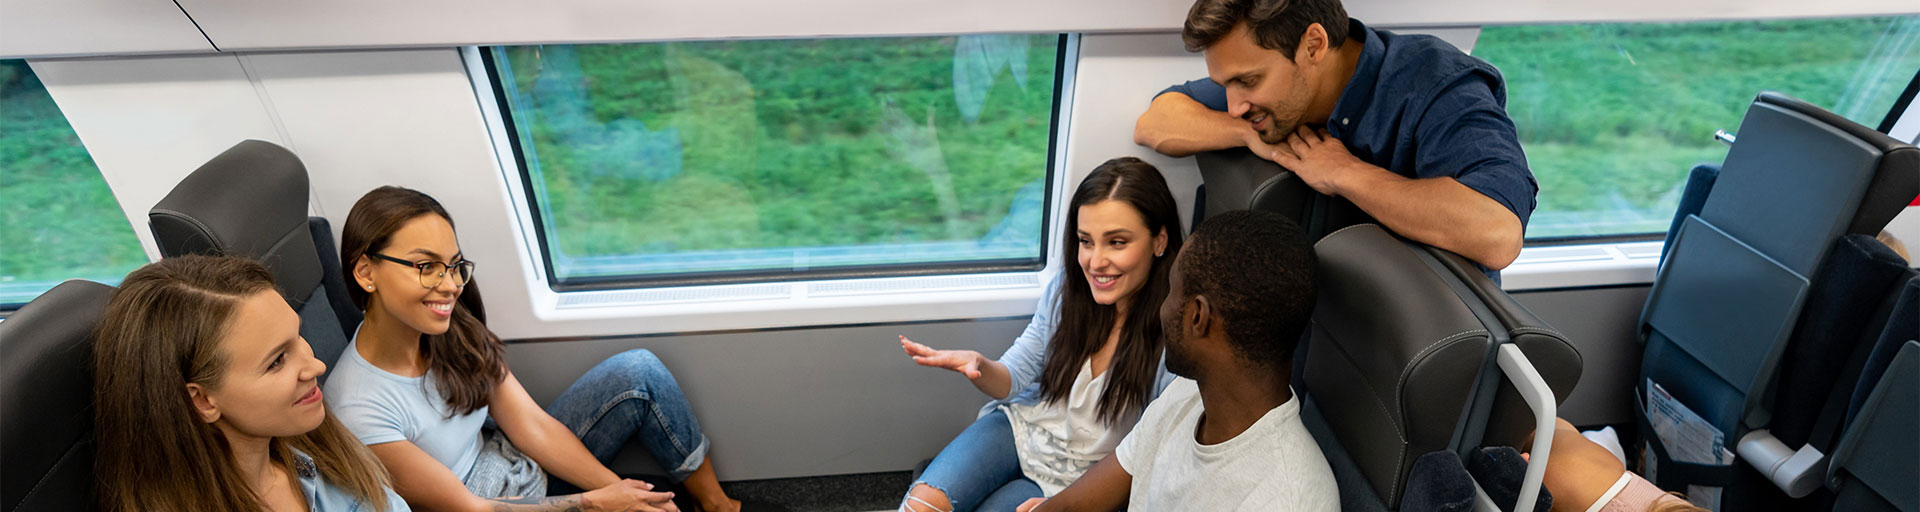 Group of young adult sitting on a train smiling